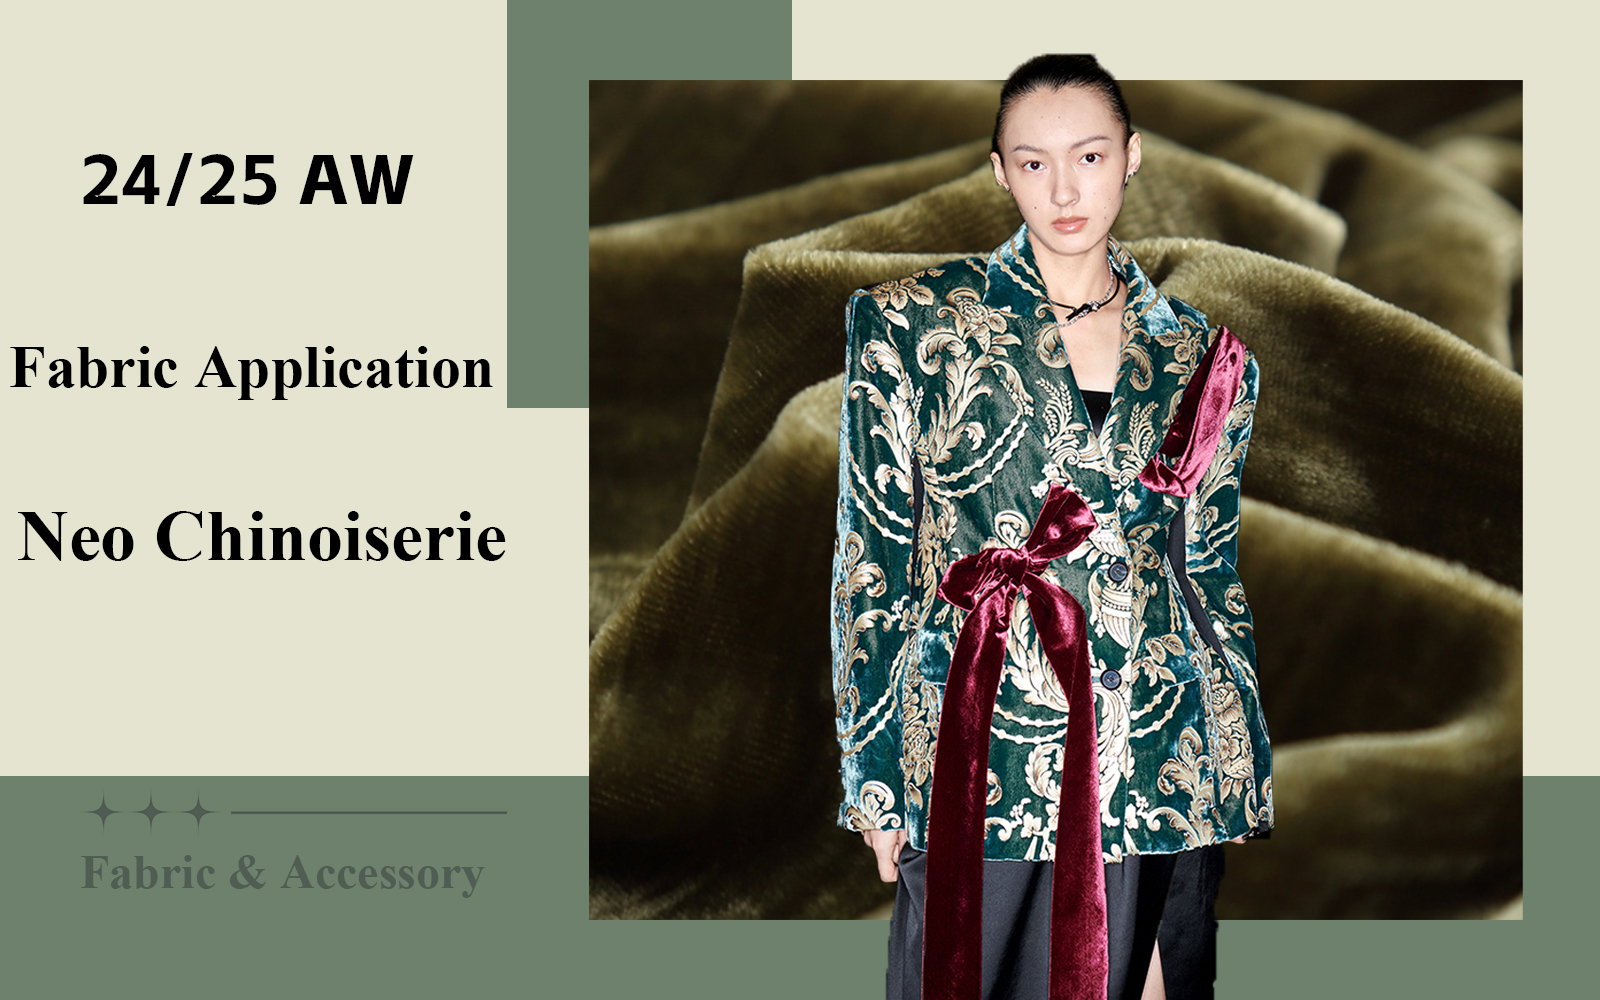 Neo Chinoiserie -- The Fabric Trend of Women's Outerwear